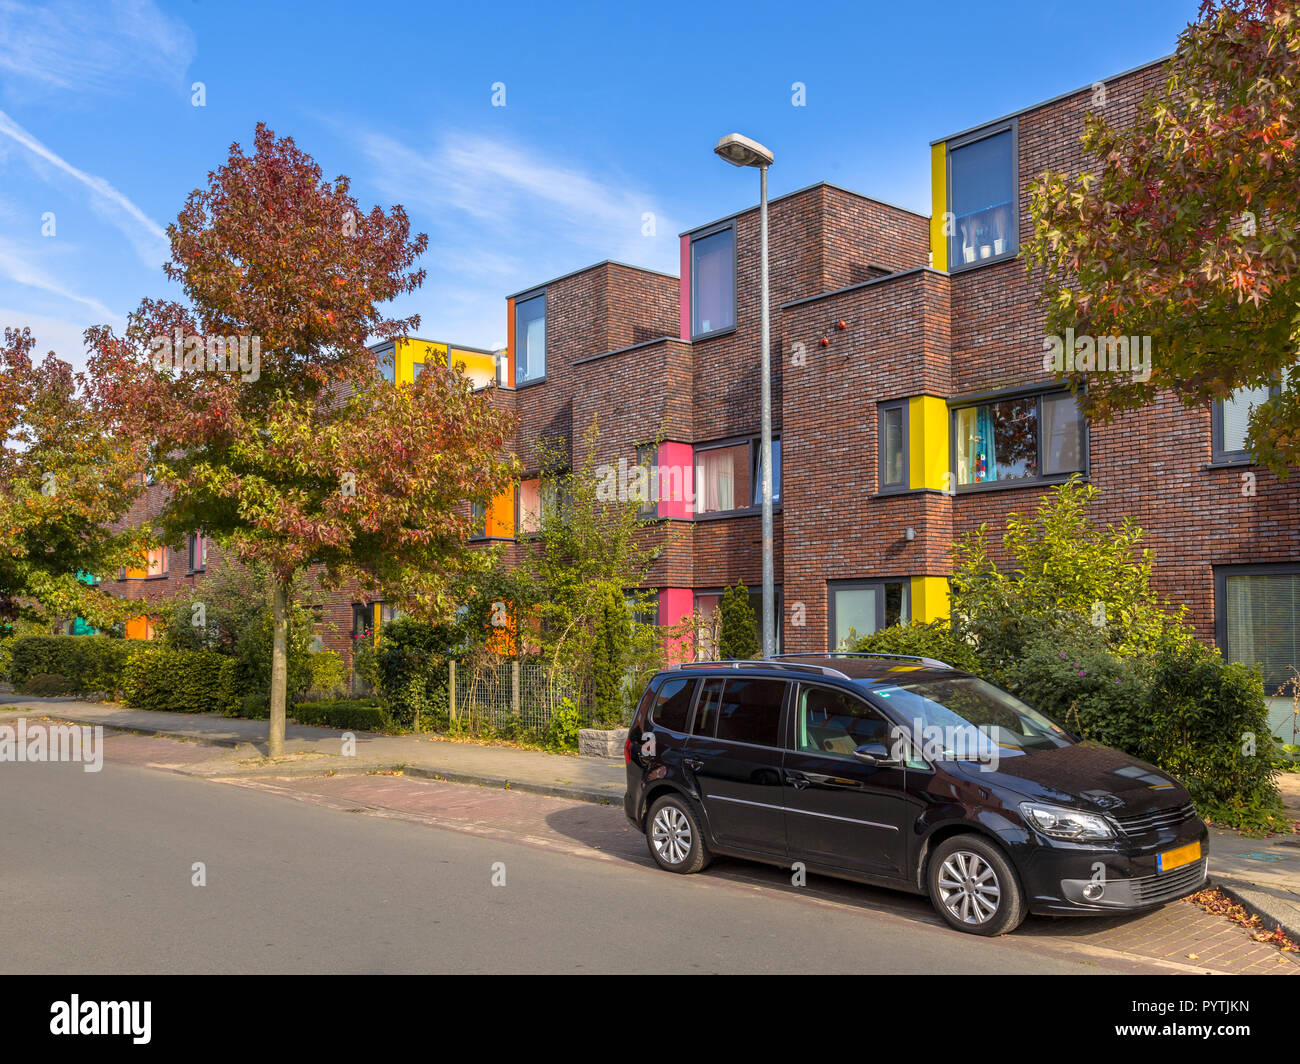 Colorful modern suburban family row houses in a lively proper neighborhood with trees and gardens Stock Photo